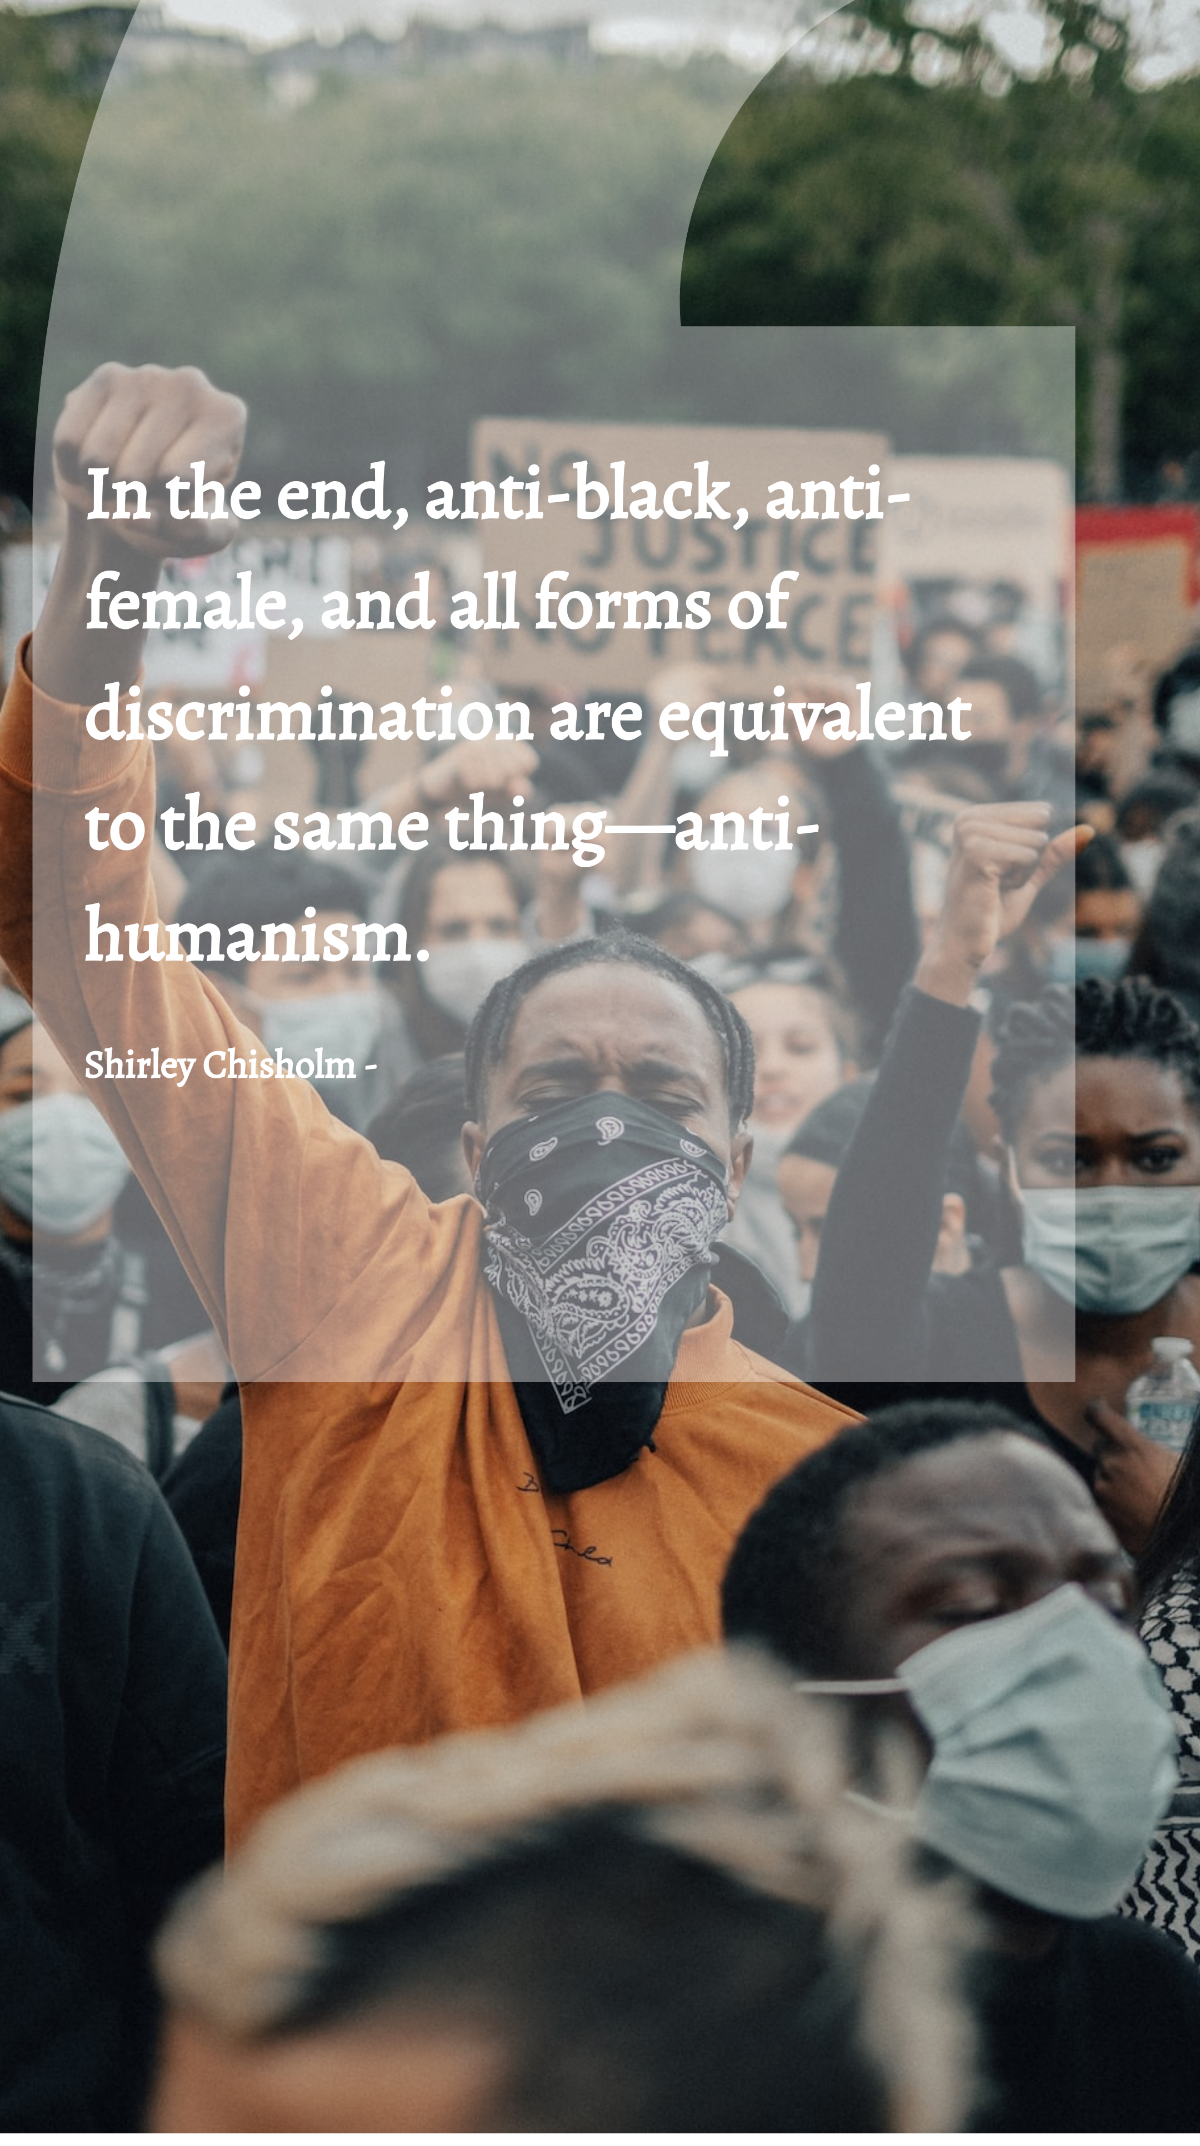 Shirley Chisholm - In the end, anti-black, anti-female, and all forms of discrimination are equivalent to the same thing—anti-humanism.